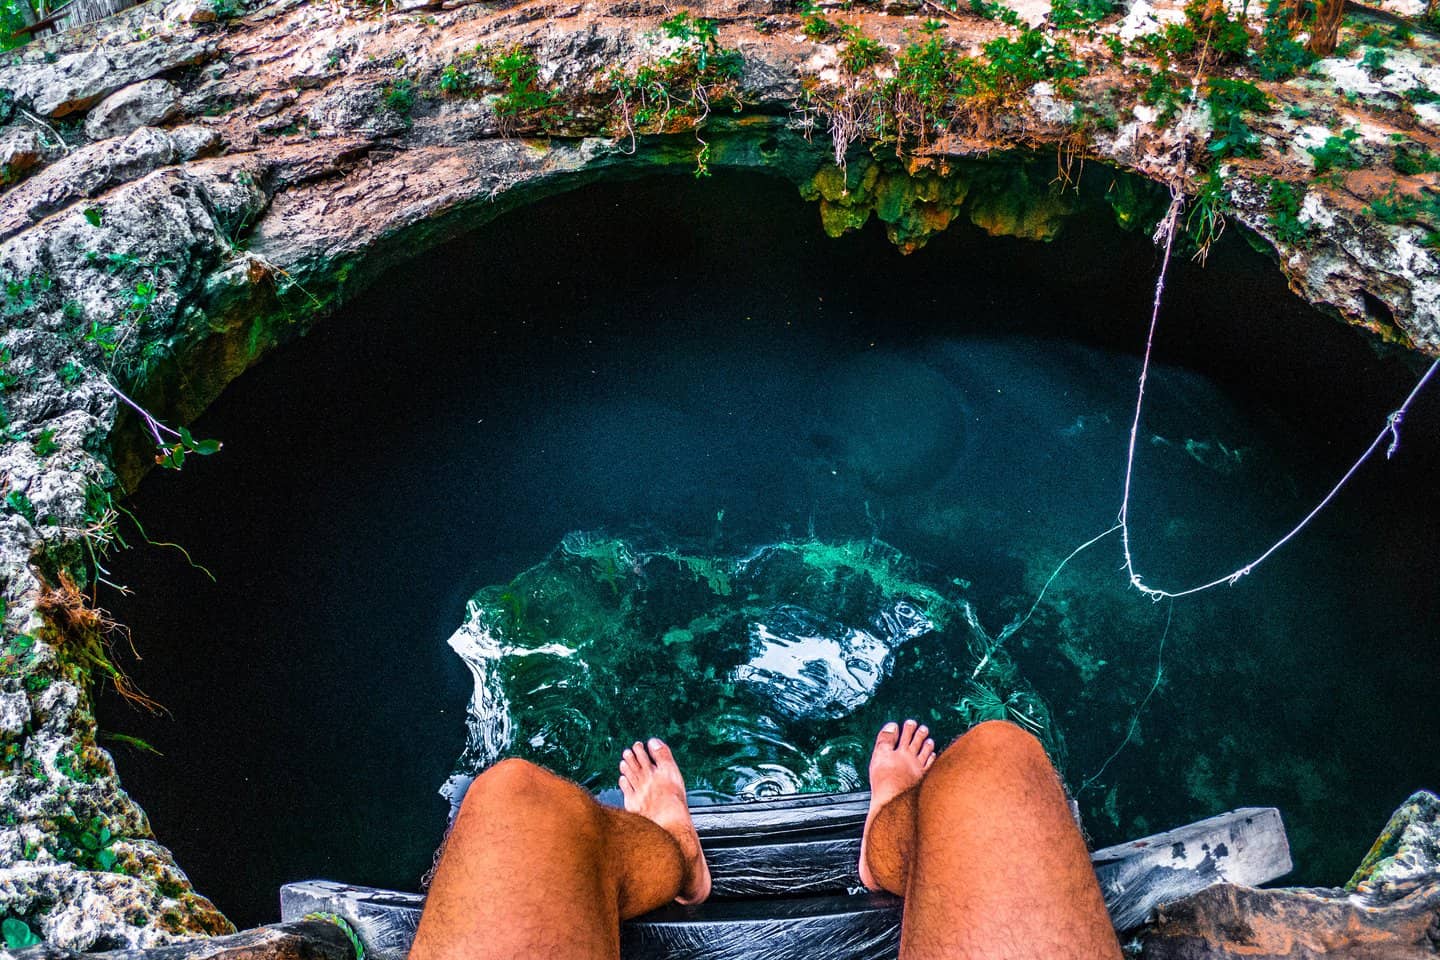 Tom (Adventure In You Co Founder) at a cenote in mexico